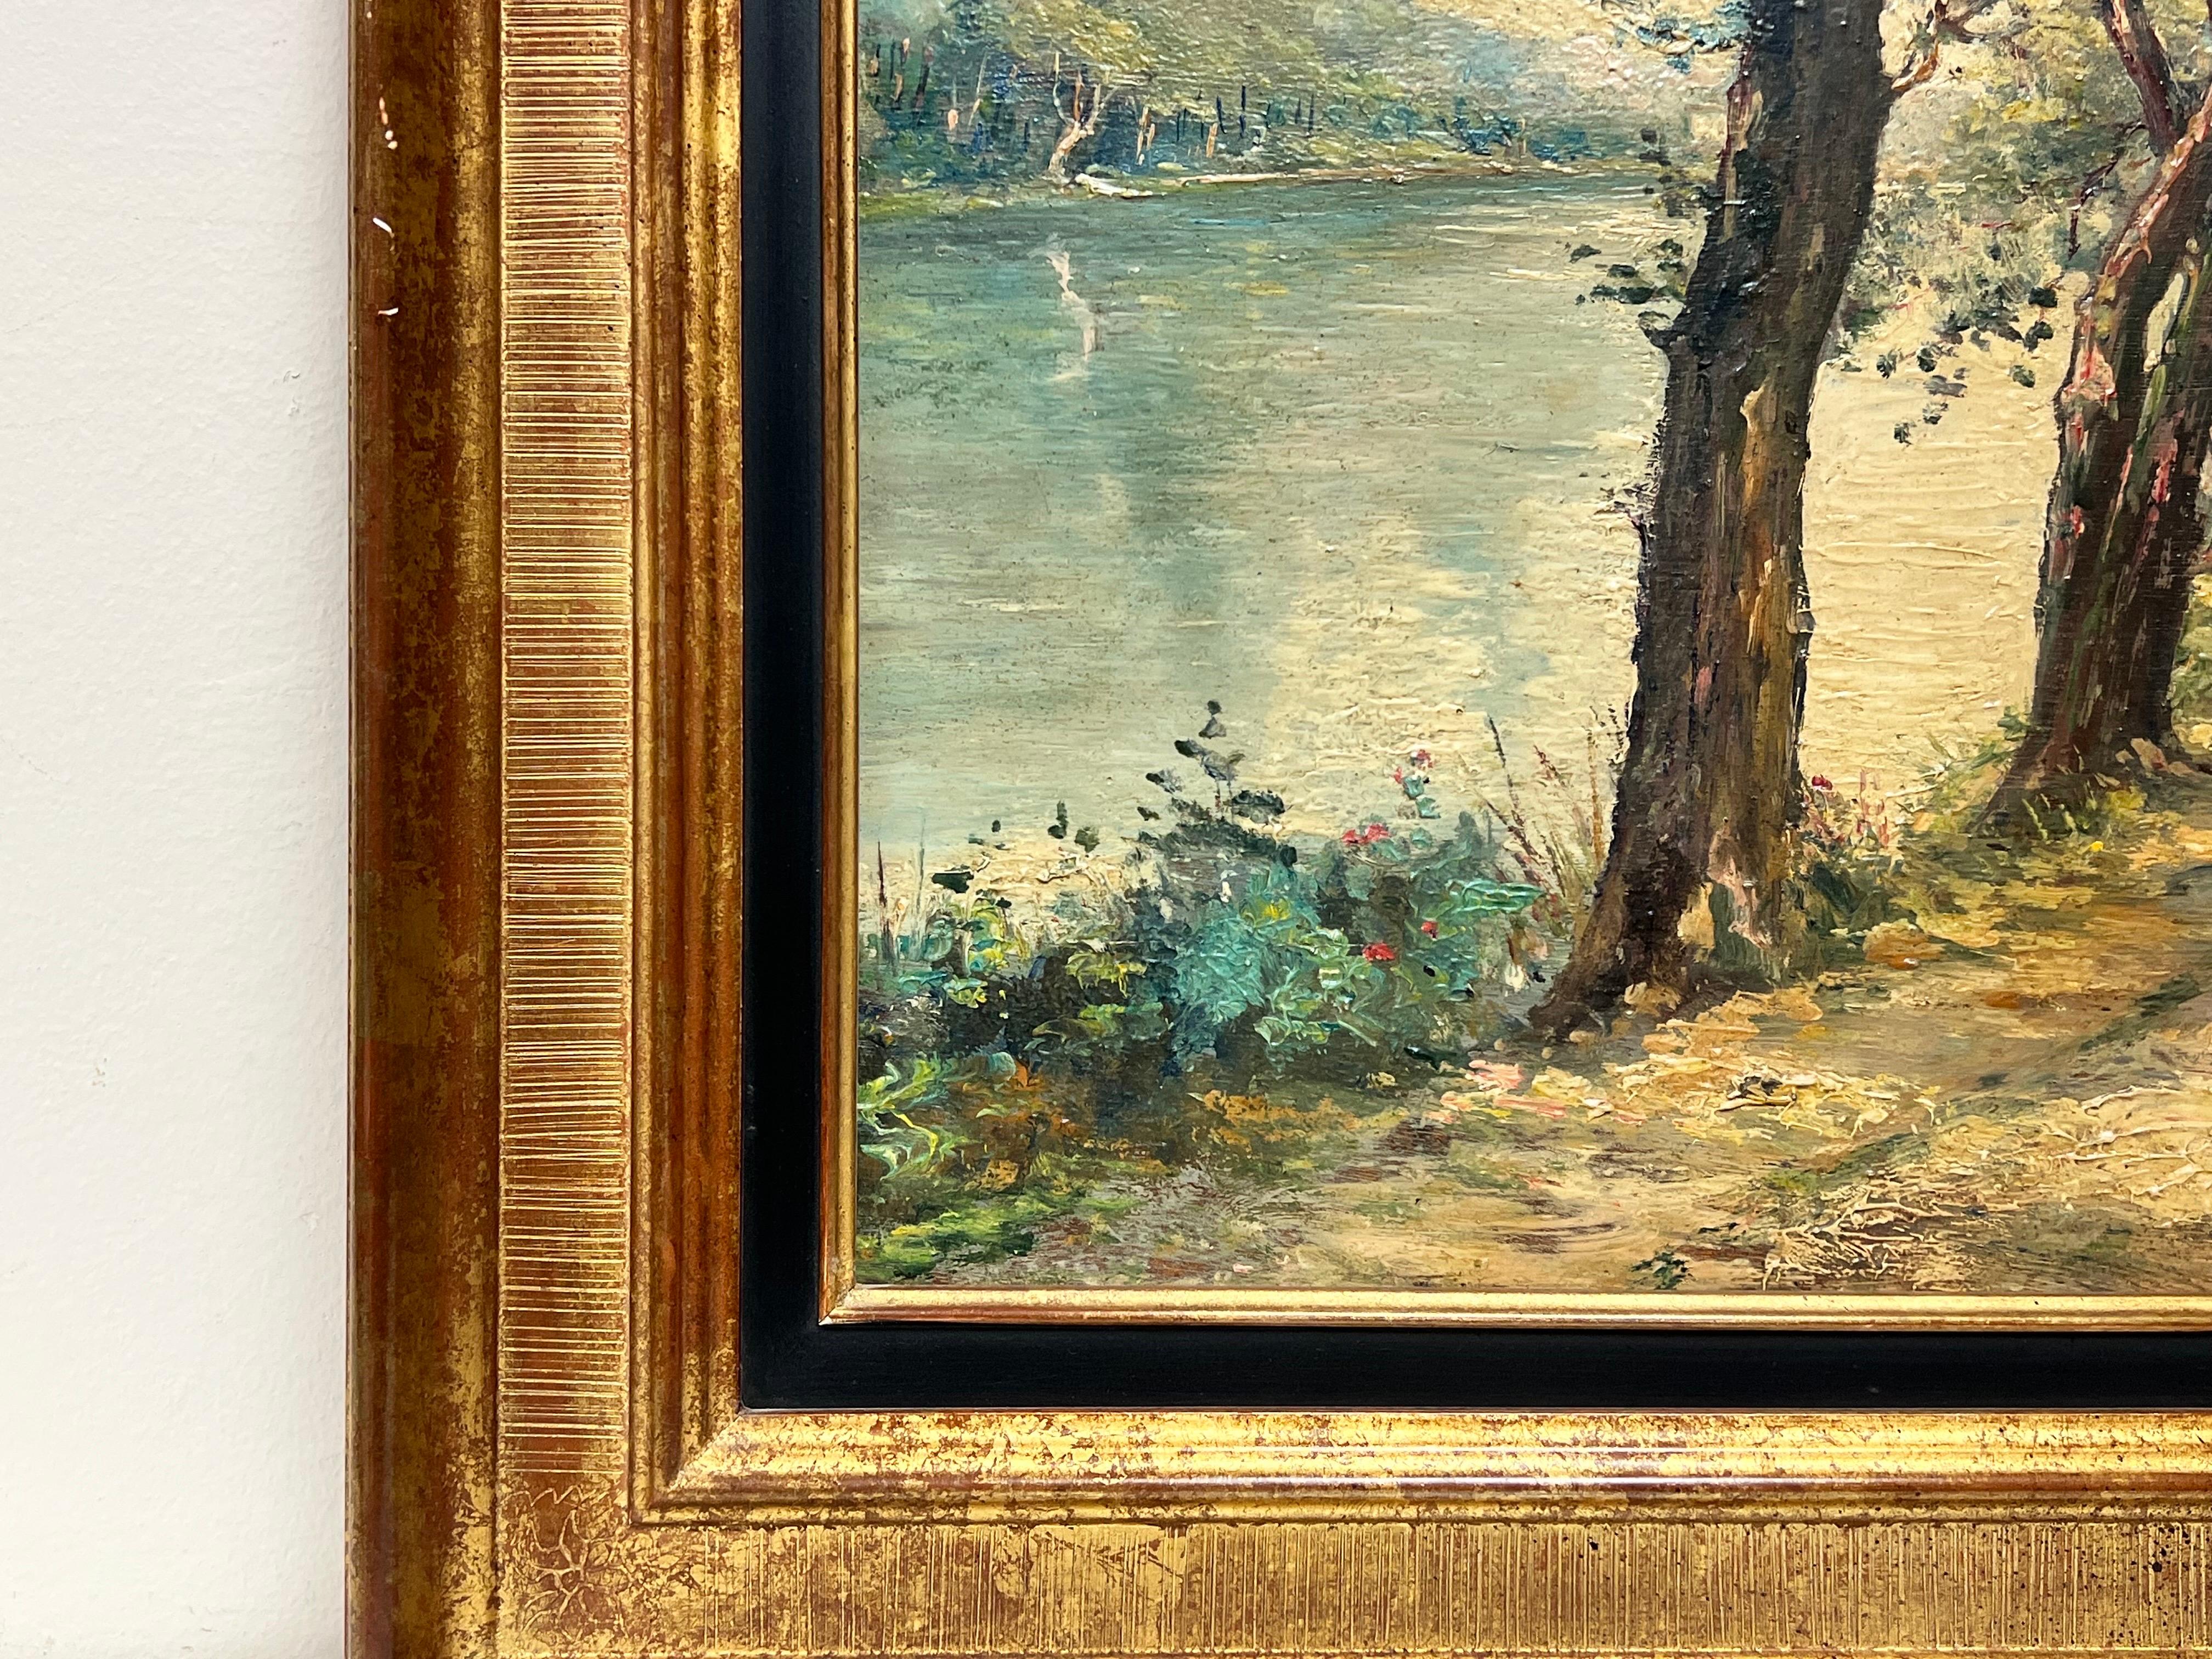 Artist/ School: French School, mid 20th century, signed M.Masse and inscribed verso with old gallery labels

Title: The Riverside Path

Medium: oil on board, framed 

Framed: 21.5 x 24.5 inches
Board: 14.5 x 17.5 inches

Provenance: private